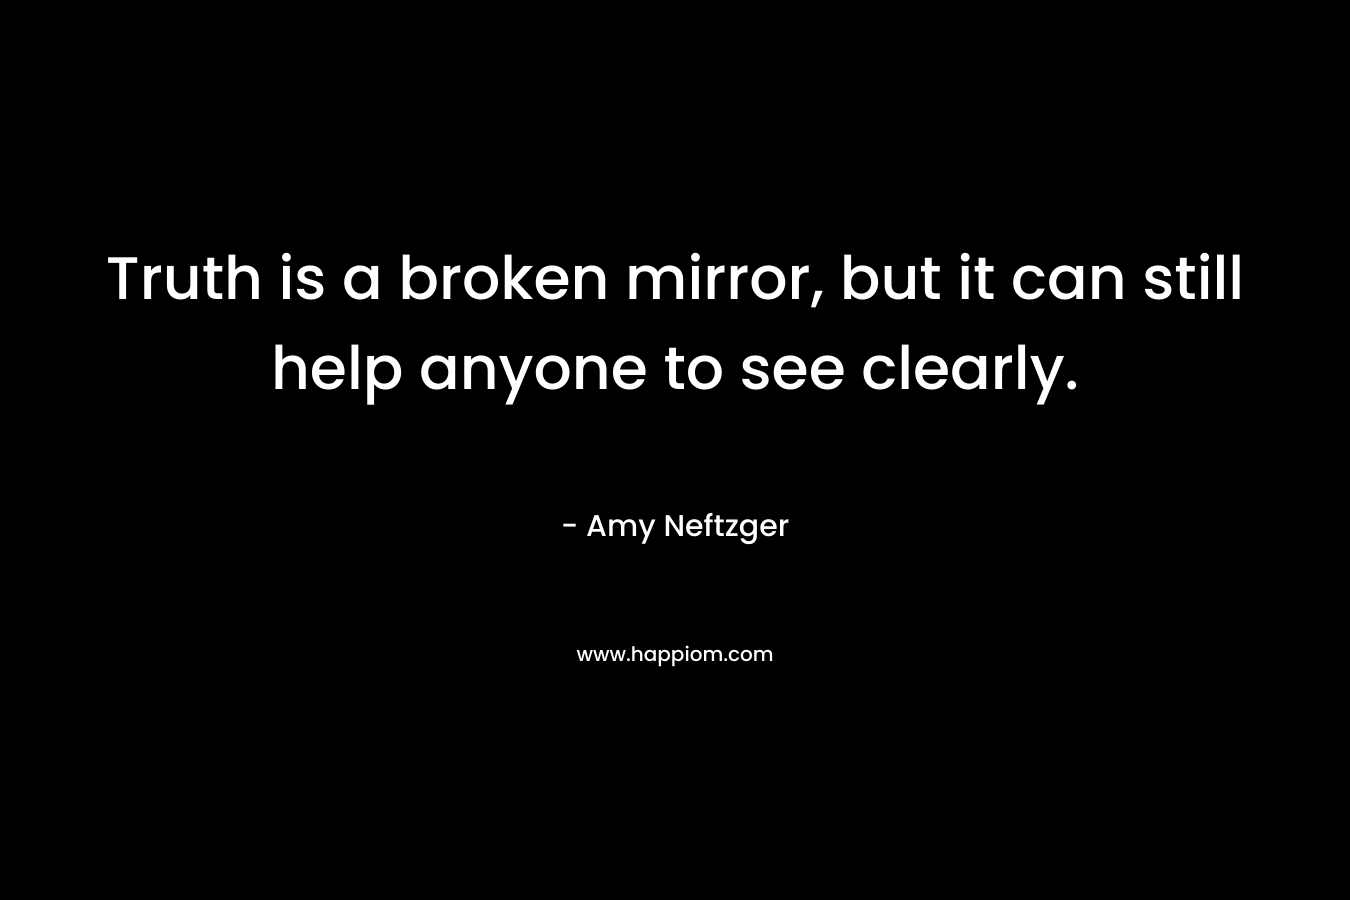 Truth is a broken mirror, but it can still help anyone to see clearly.